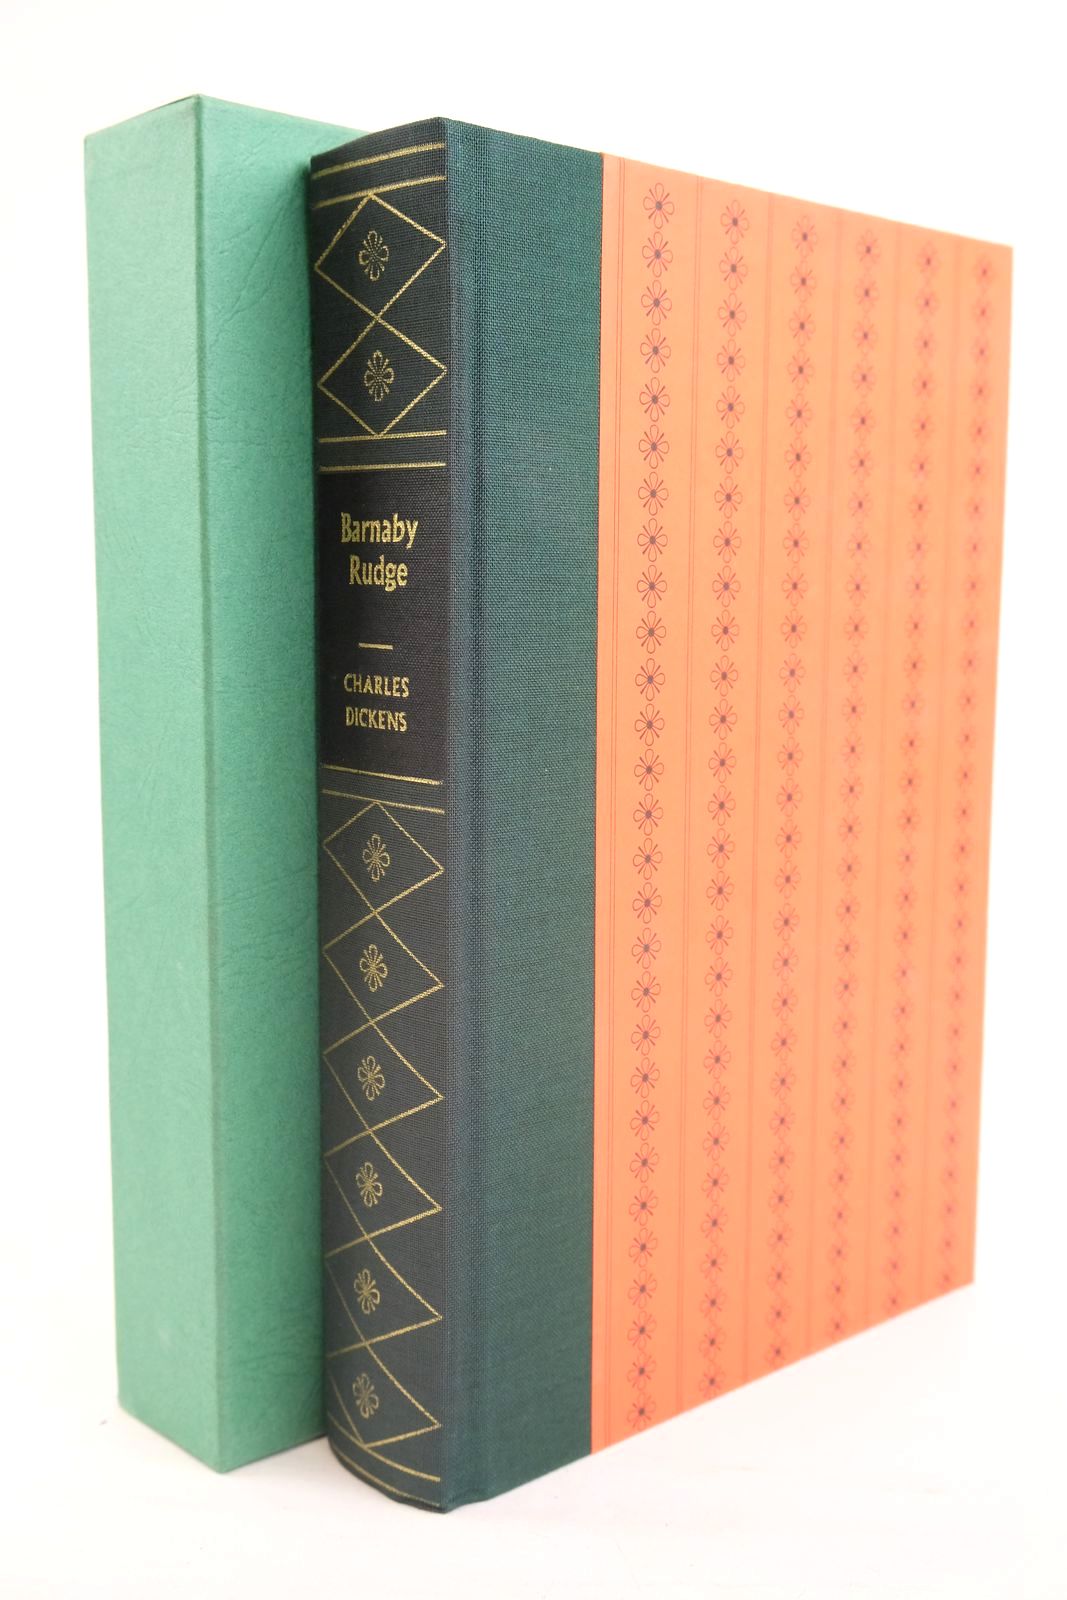 Photo of BARNABY RUDGE A TALE OF THE RIOTS OF 'EIGHTY written by Dickens, Charles illustrated by Keeping, Charles published by Folio Society (STOCK CODE: 1320026)  for sale by Stella & Rose's Books